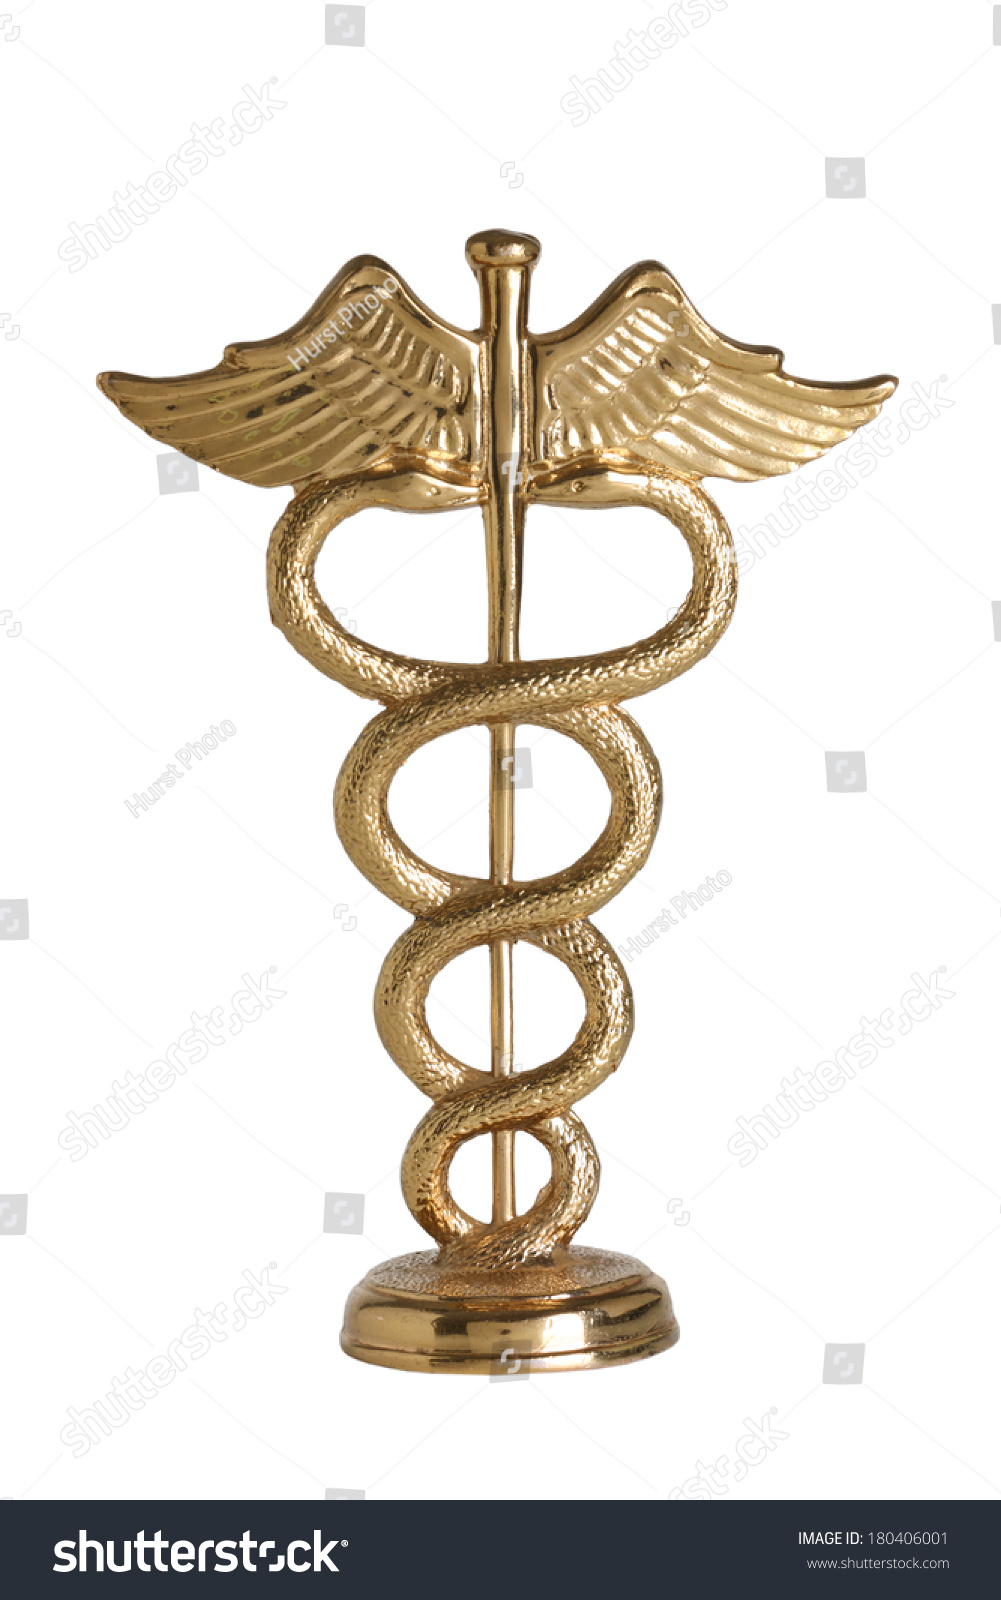 Medical Symbol Caduceus Cut Out On Stock Photo 180406001 | Shutterstock